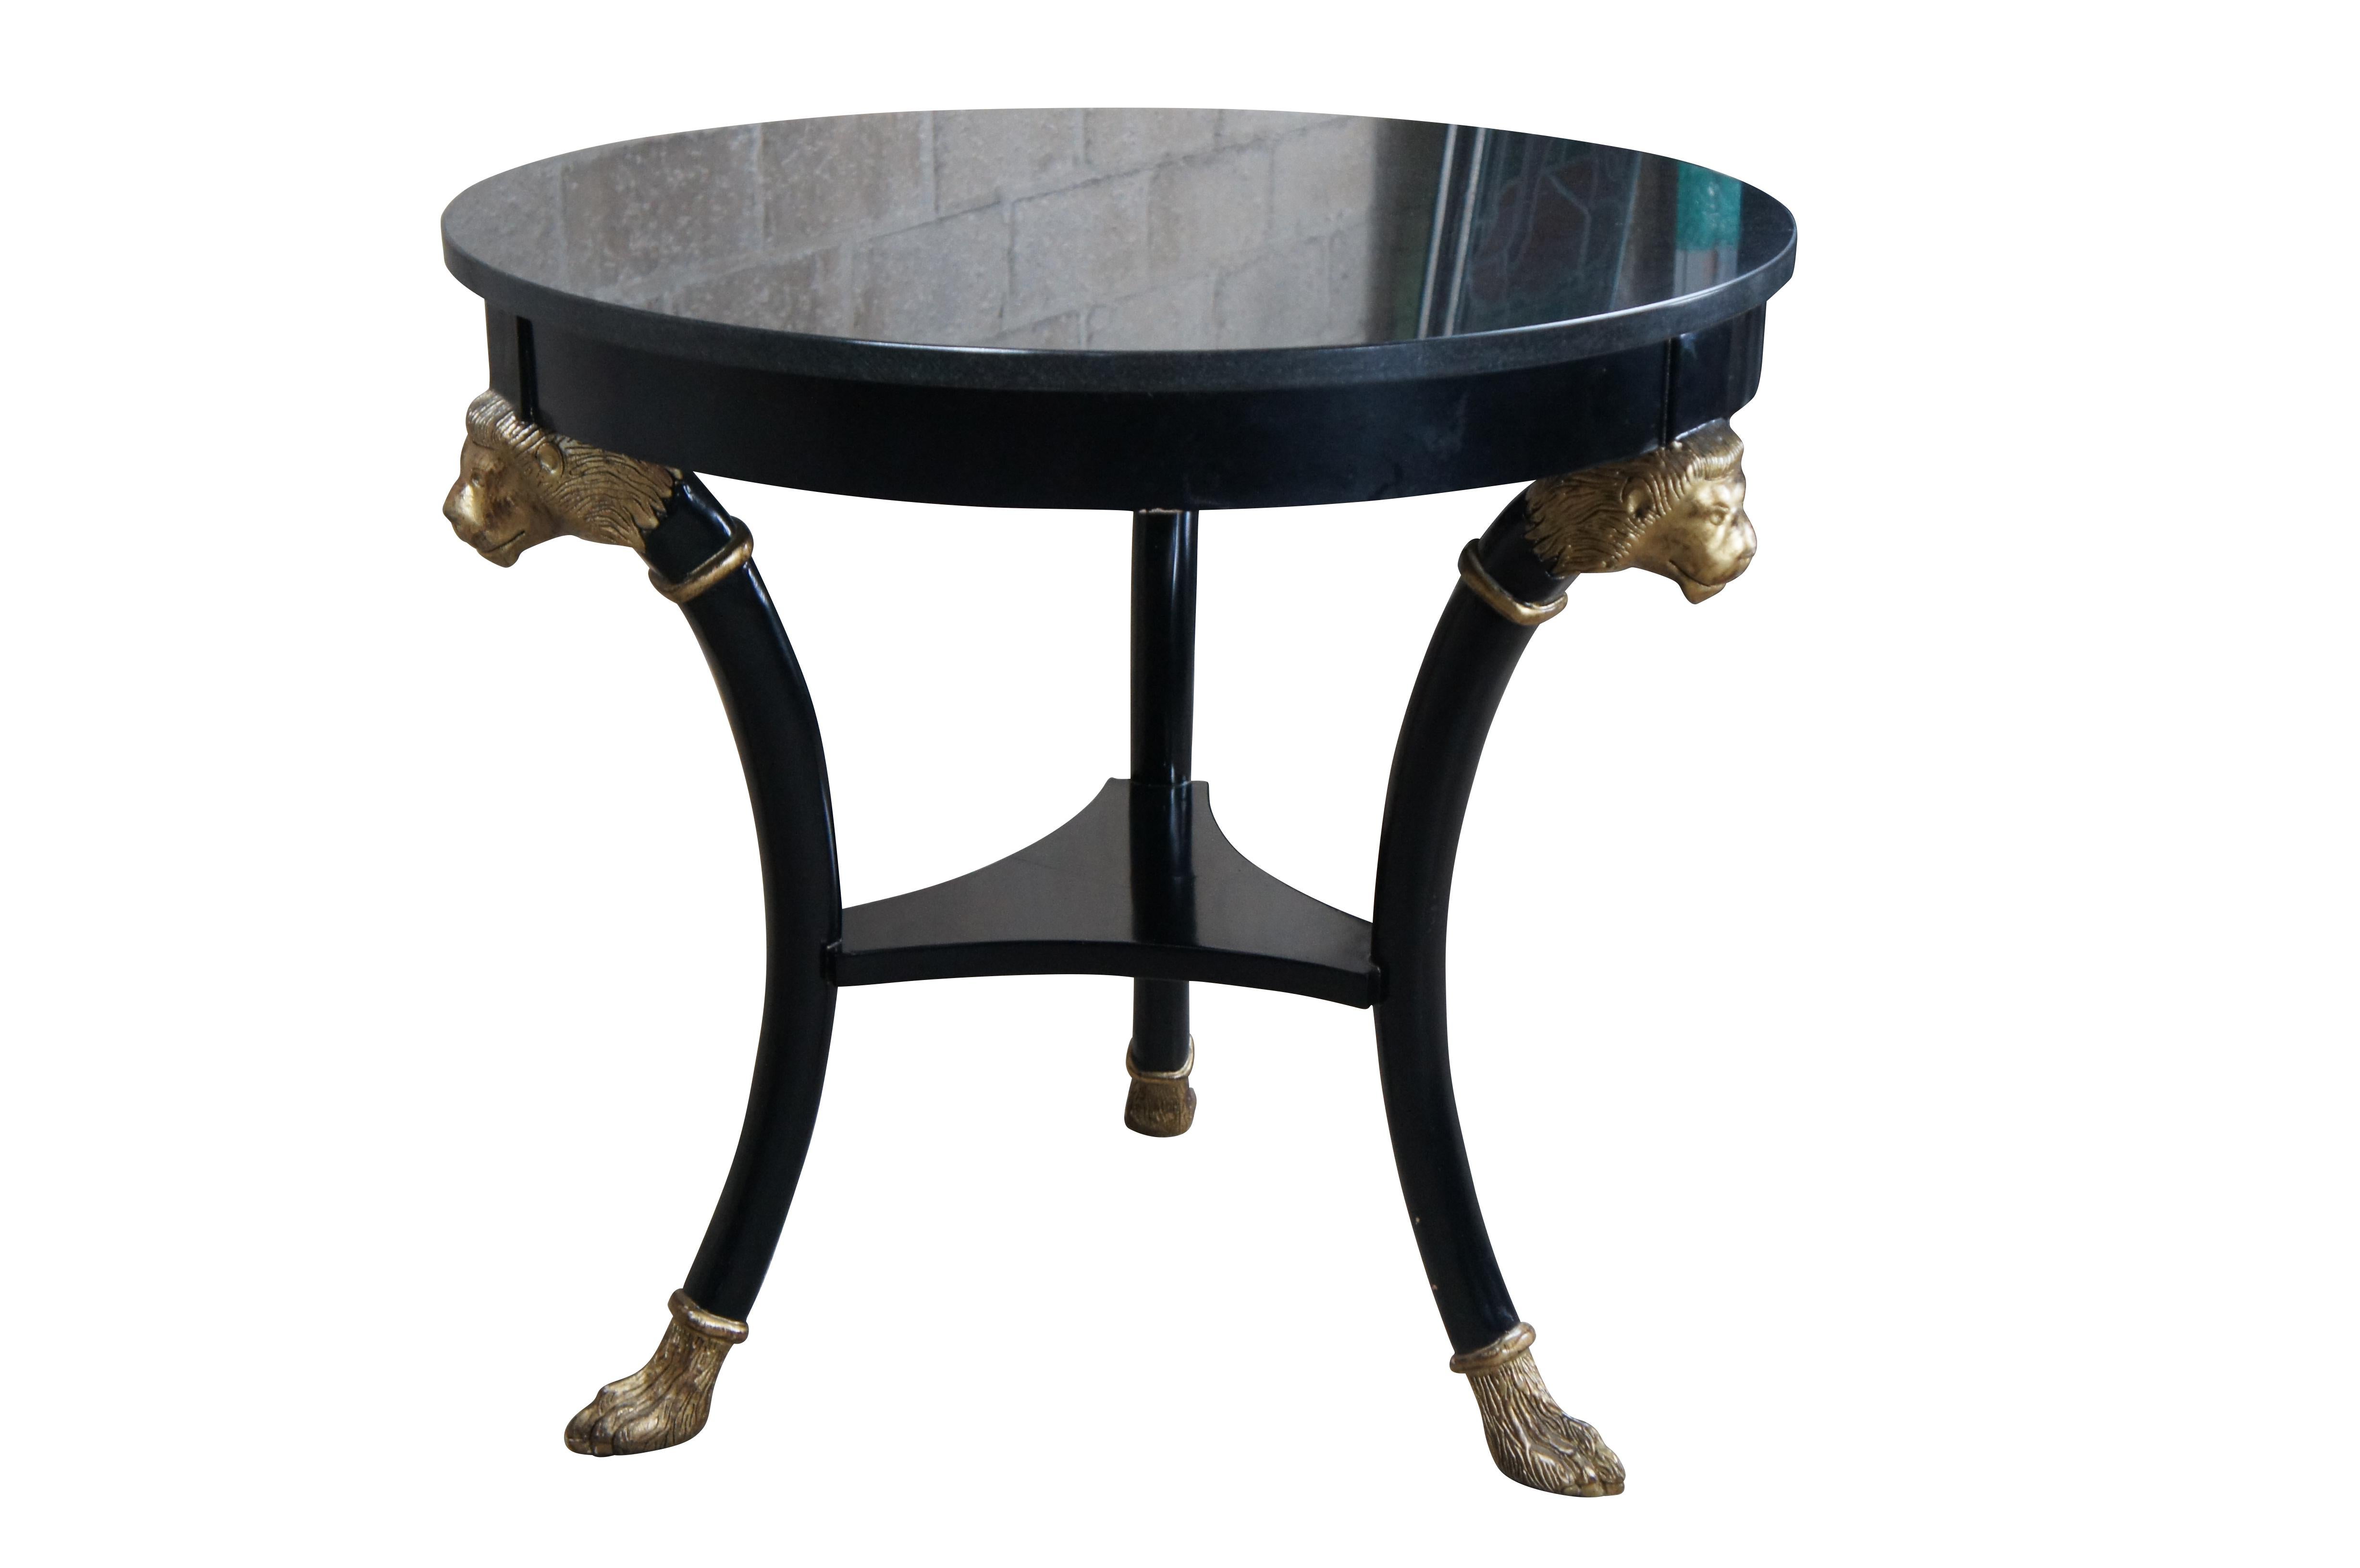 Late 20th Century Baker Furniture Empire / Regency / Neoclassical inspired Gueridon side table. Features a hardwood ebonized frame with dark granite top. The round form is supported by three contoured legs with gold finished lion heads beneath the